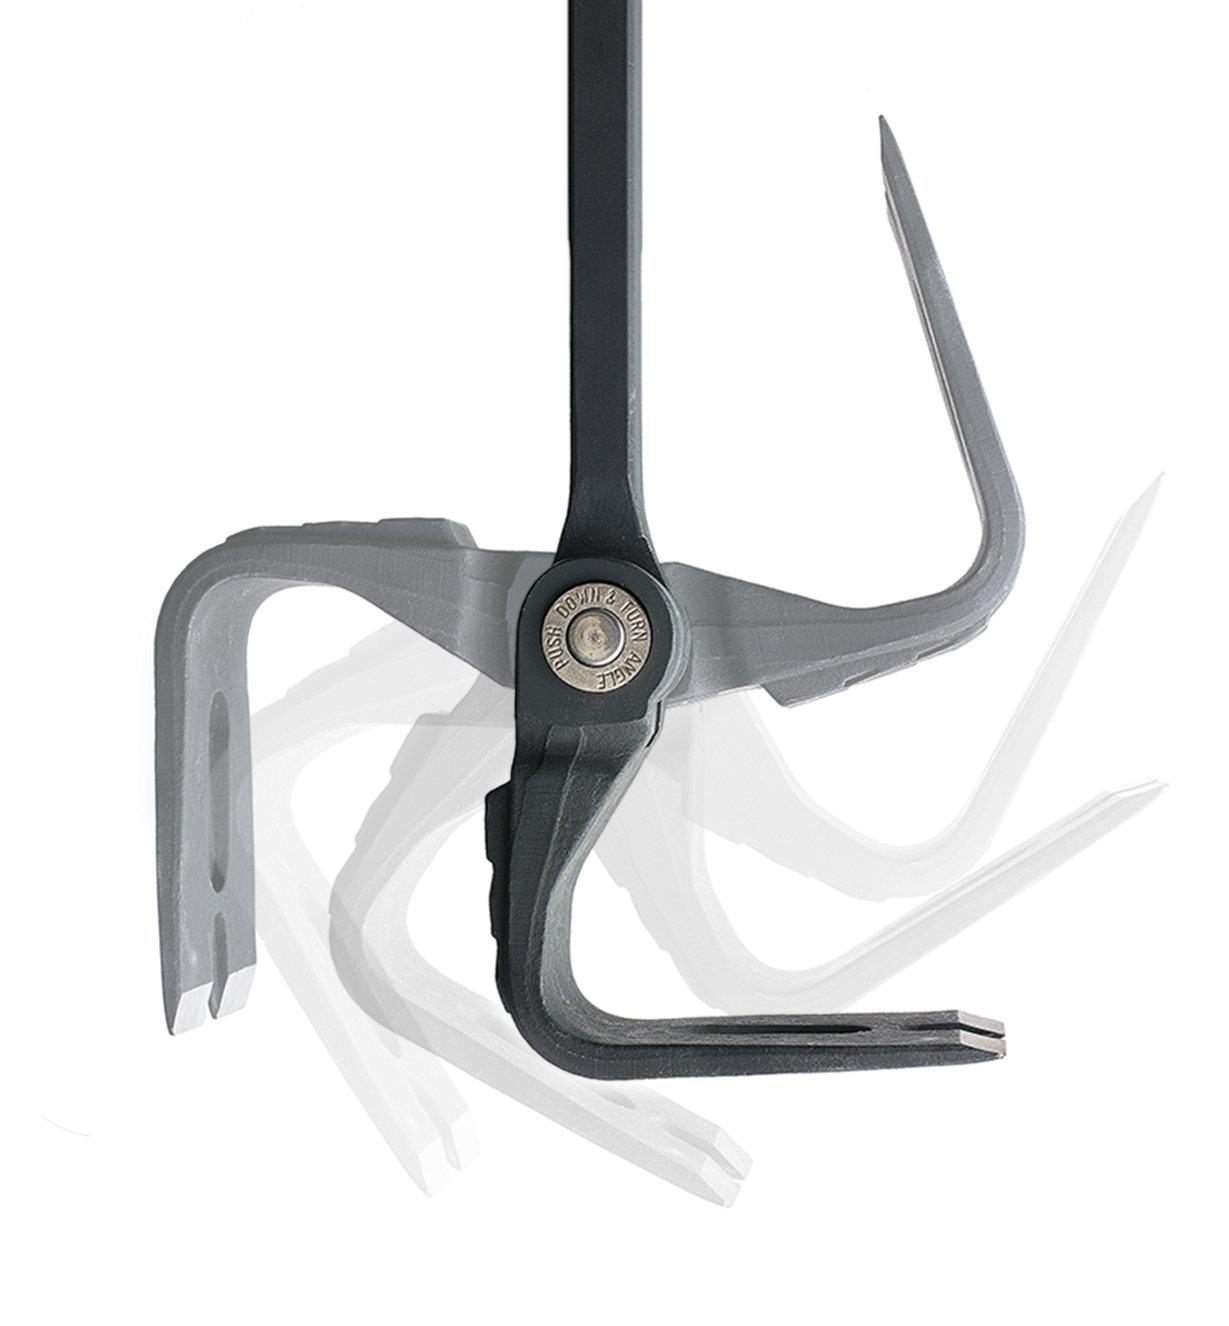 Ghosted image showing the different positions of the pry bar head